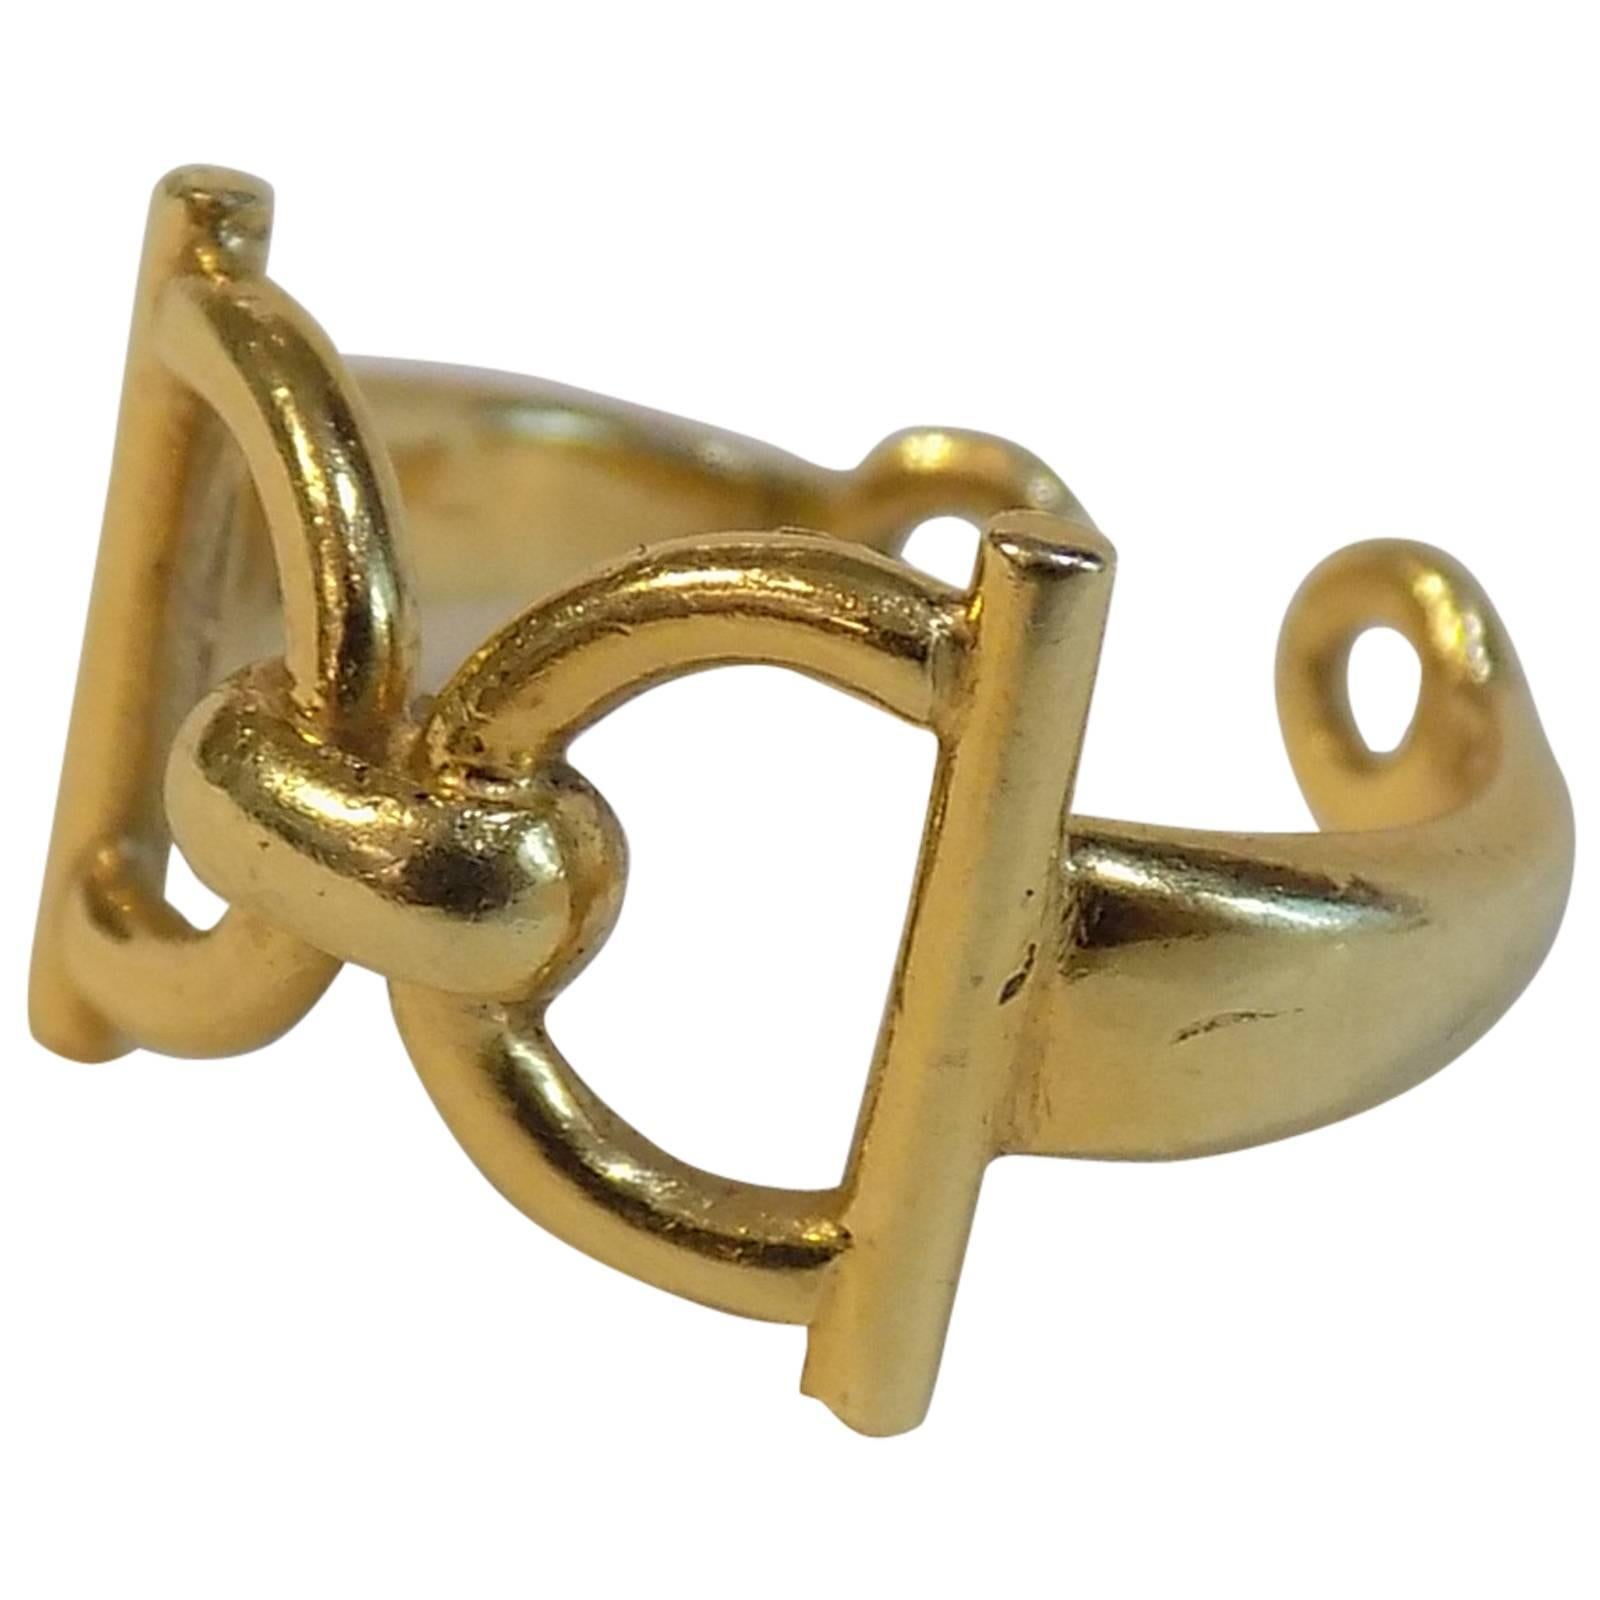  Vintage Gucci Horsebit Gold Open Ring   For Sale